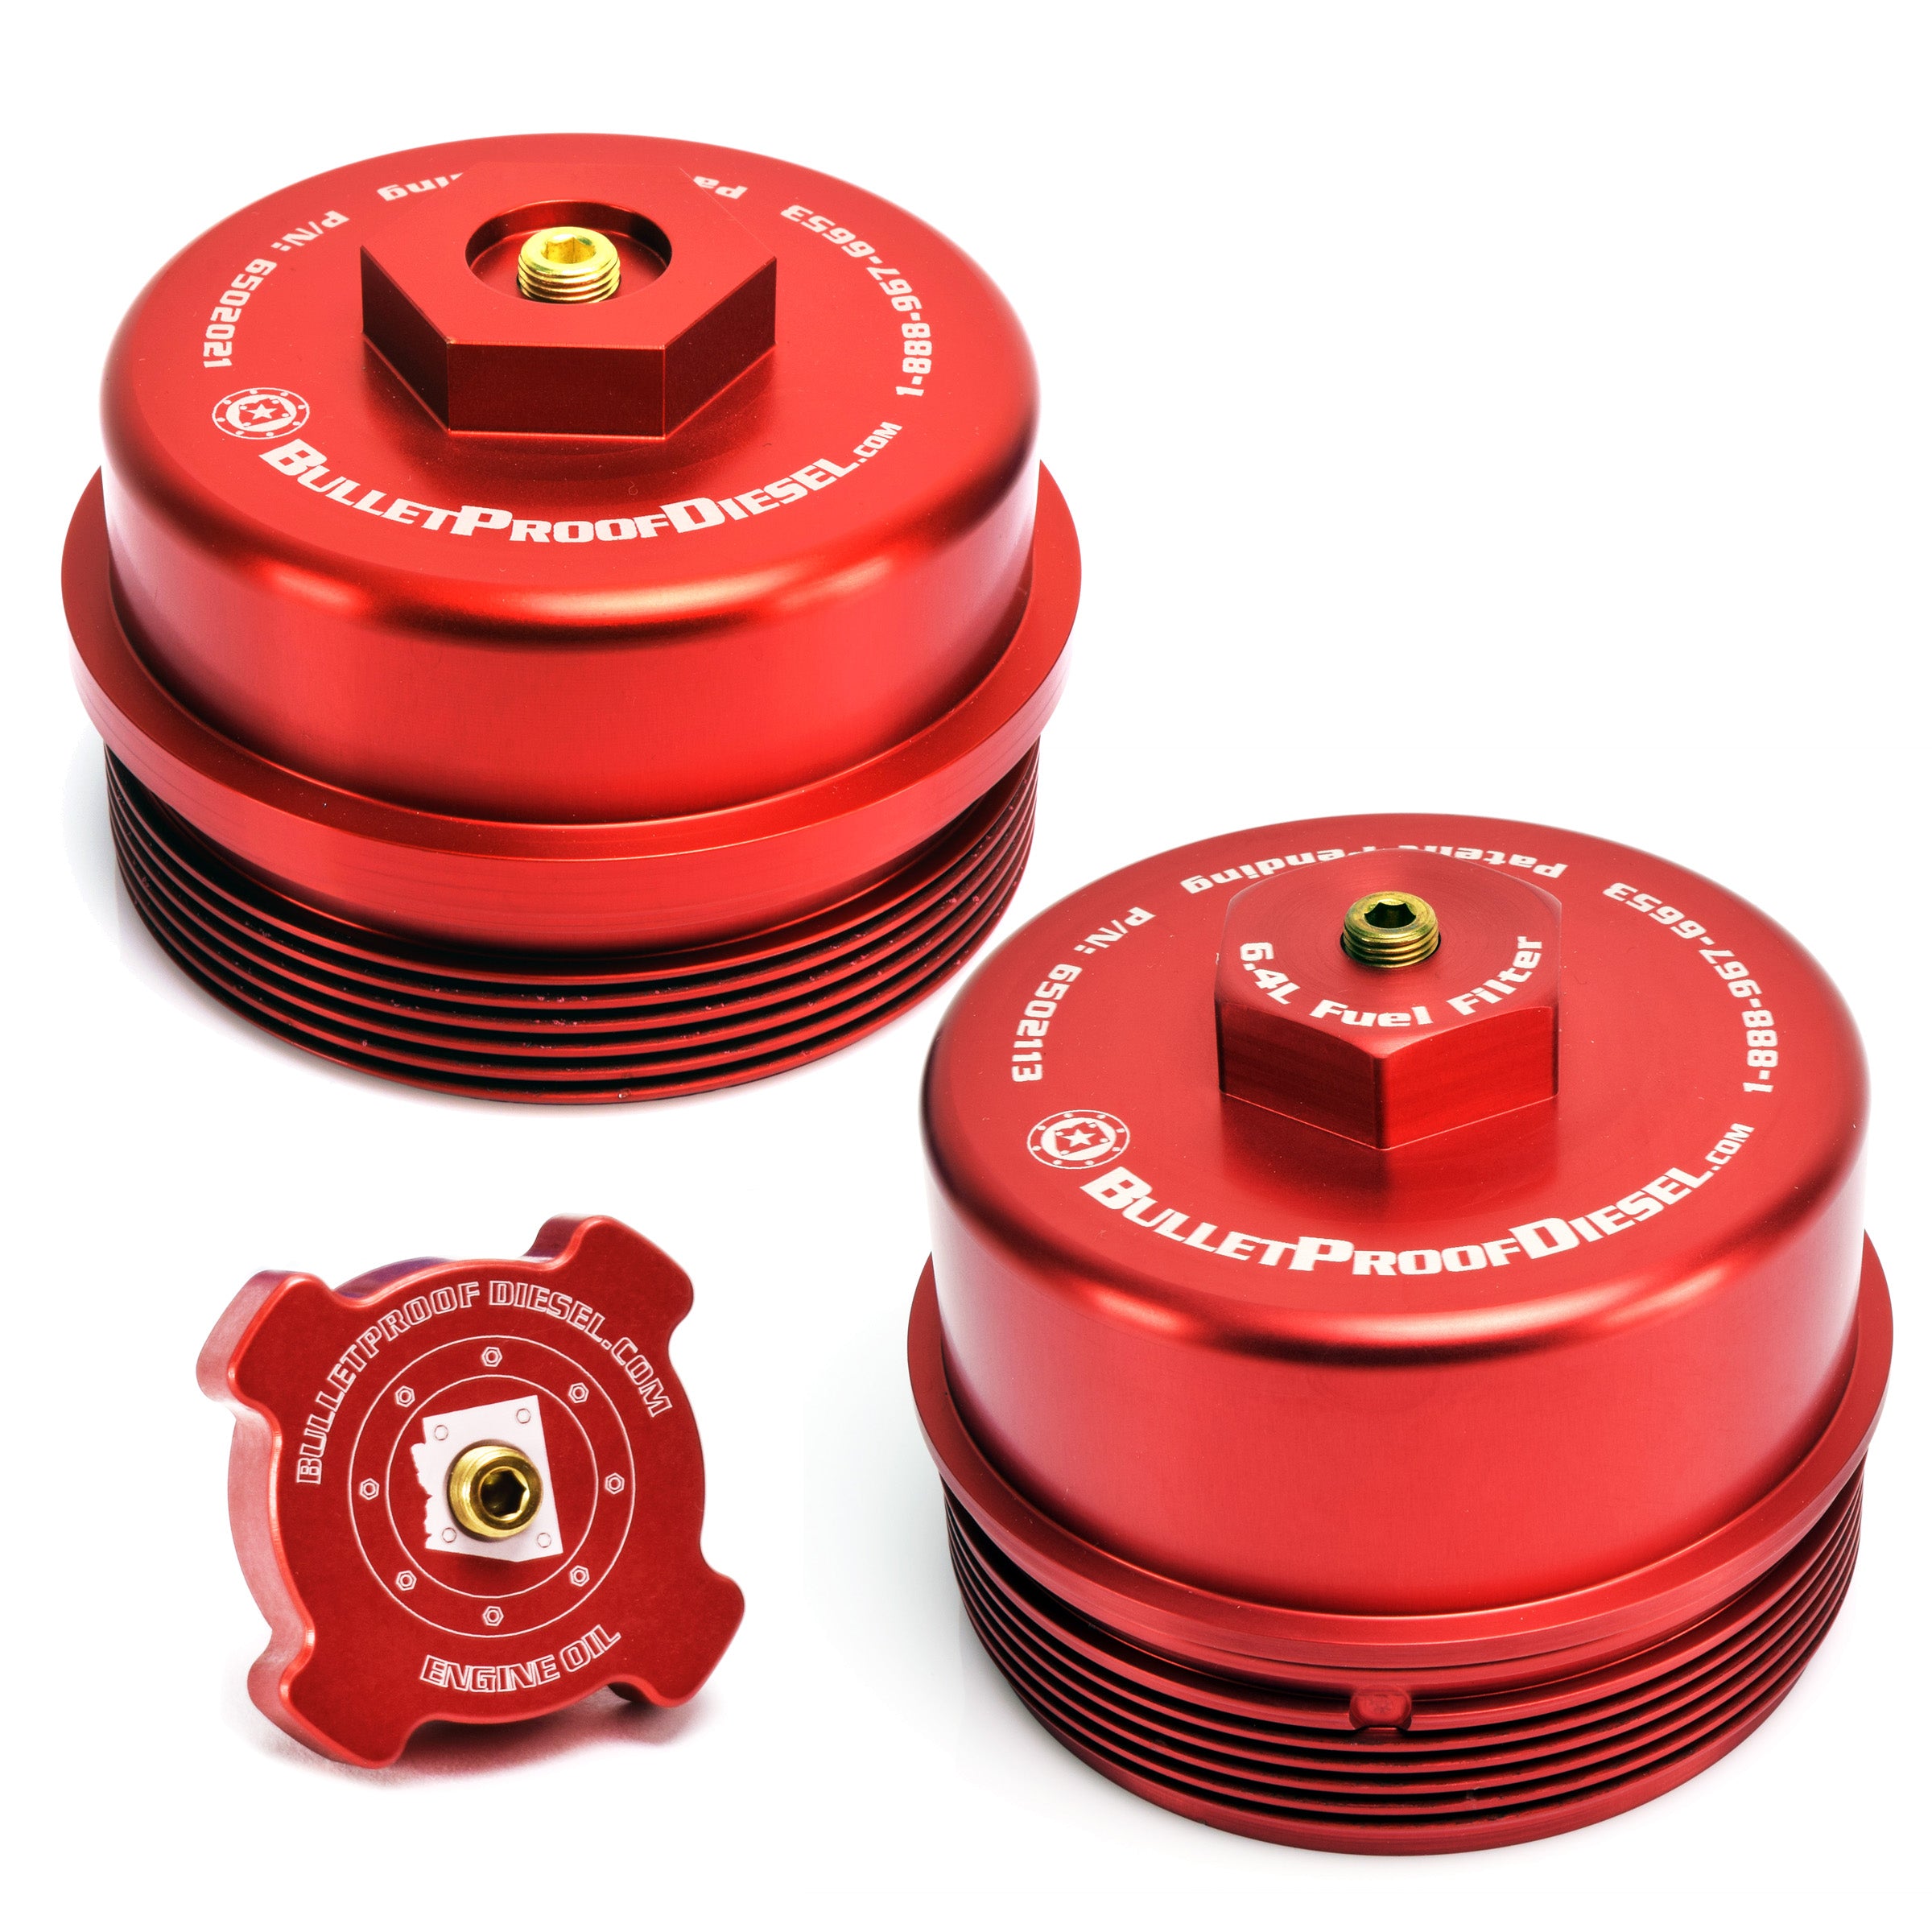 Upgraded Direct Fit Red Anodized Billet Aluminum Oil Filter, Oil Fill, and Lower Fuel Rail Cap Set for the Ford Power Stroke 6.4L Diesel with 1/8” MPT Threaded Port. Fits Years 2008 2009 2010.